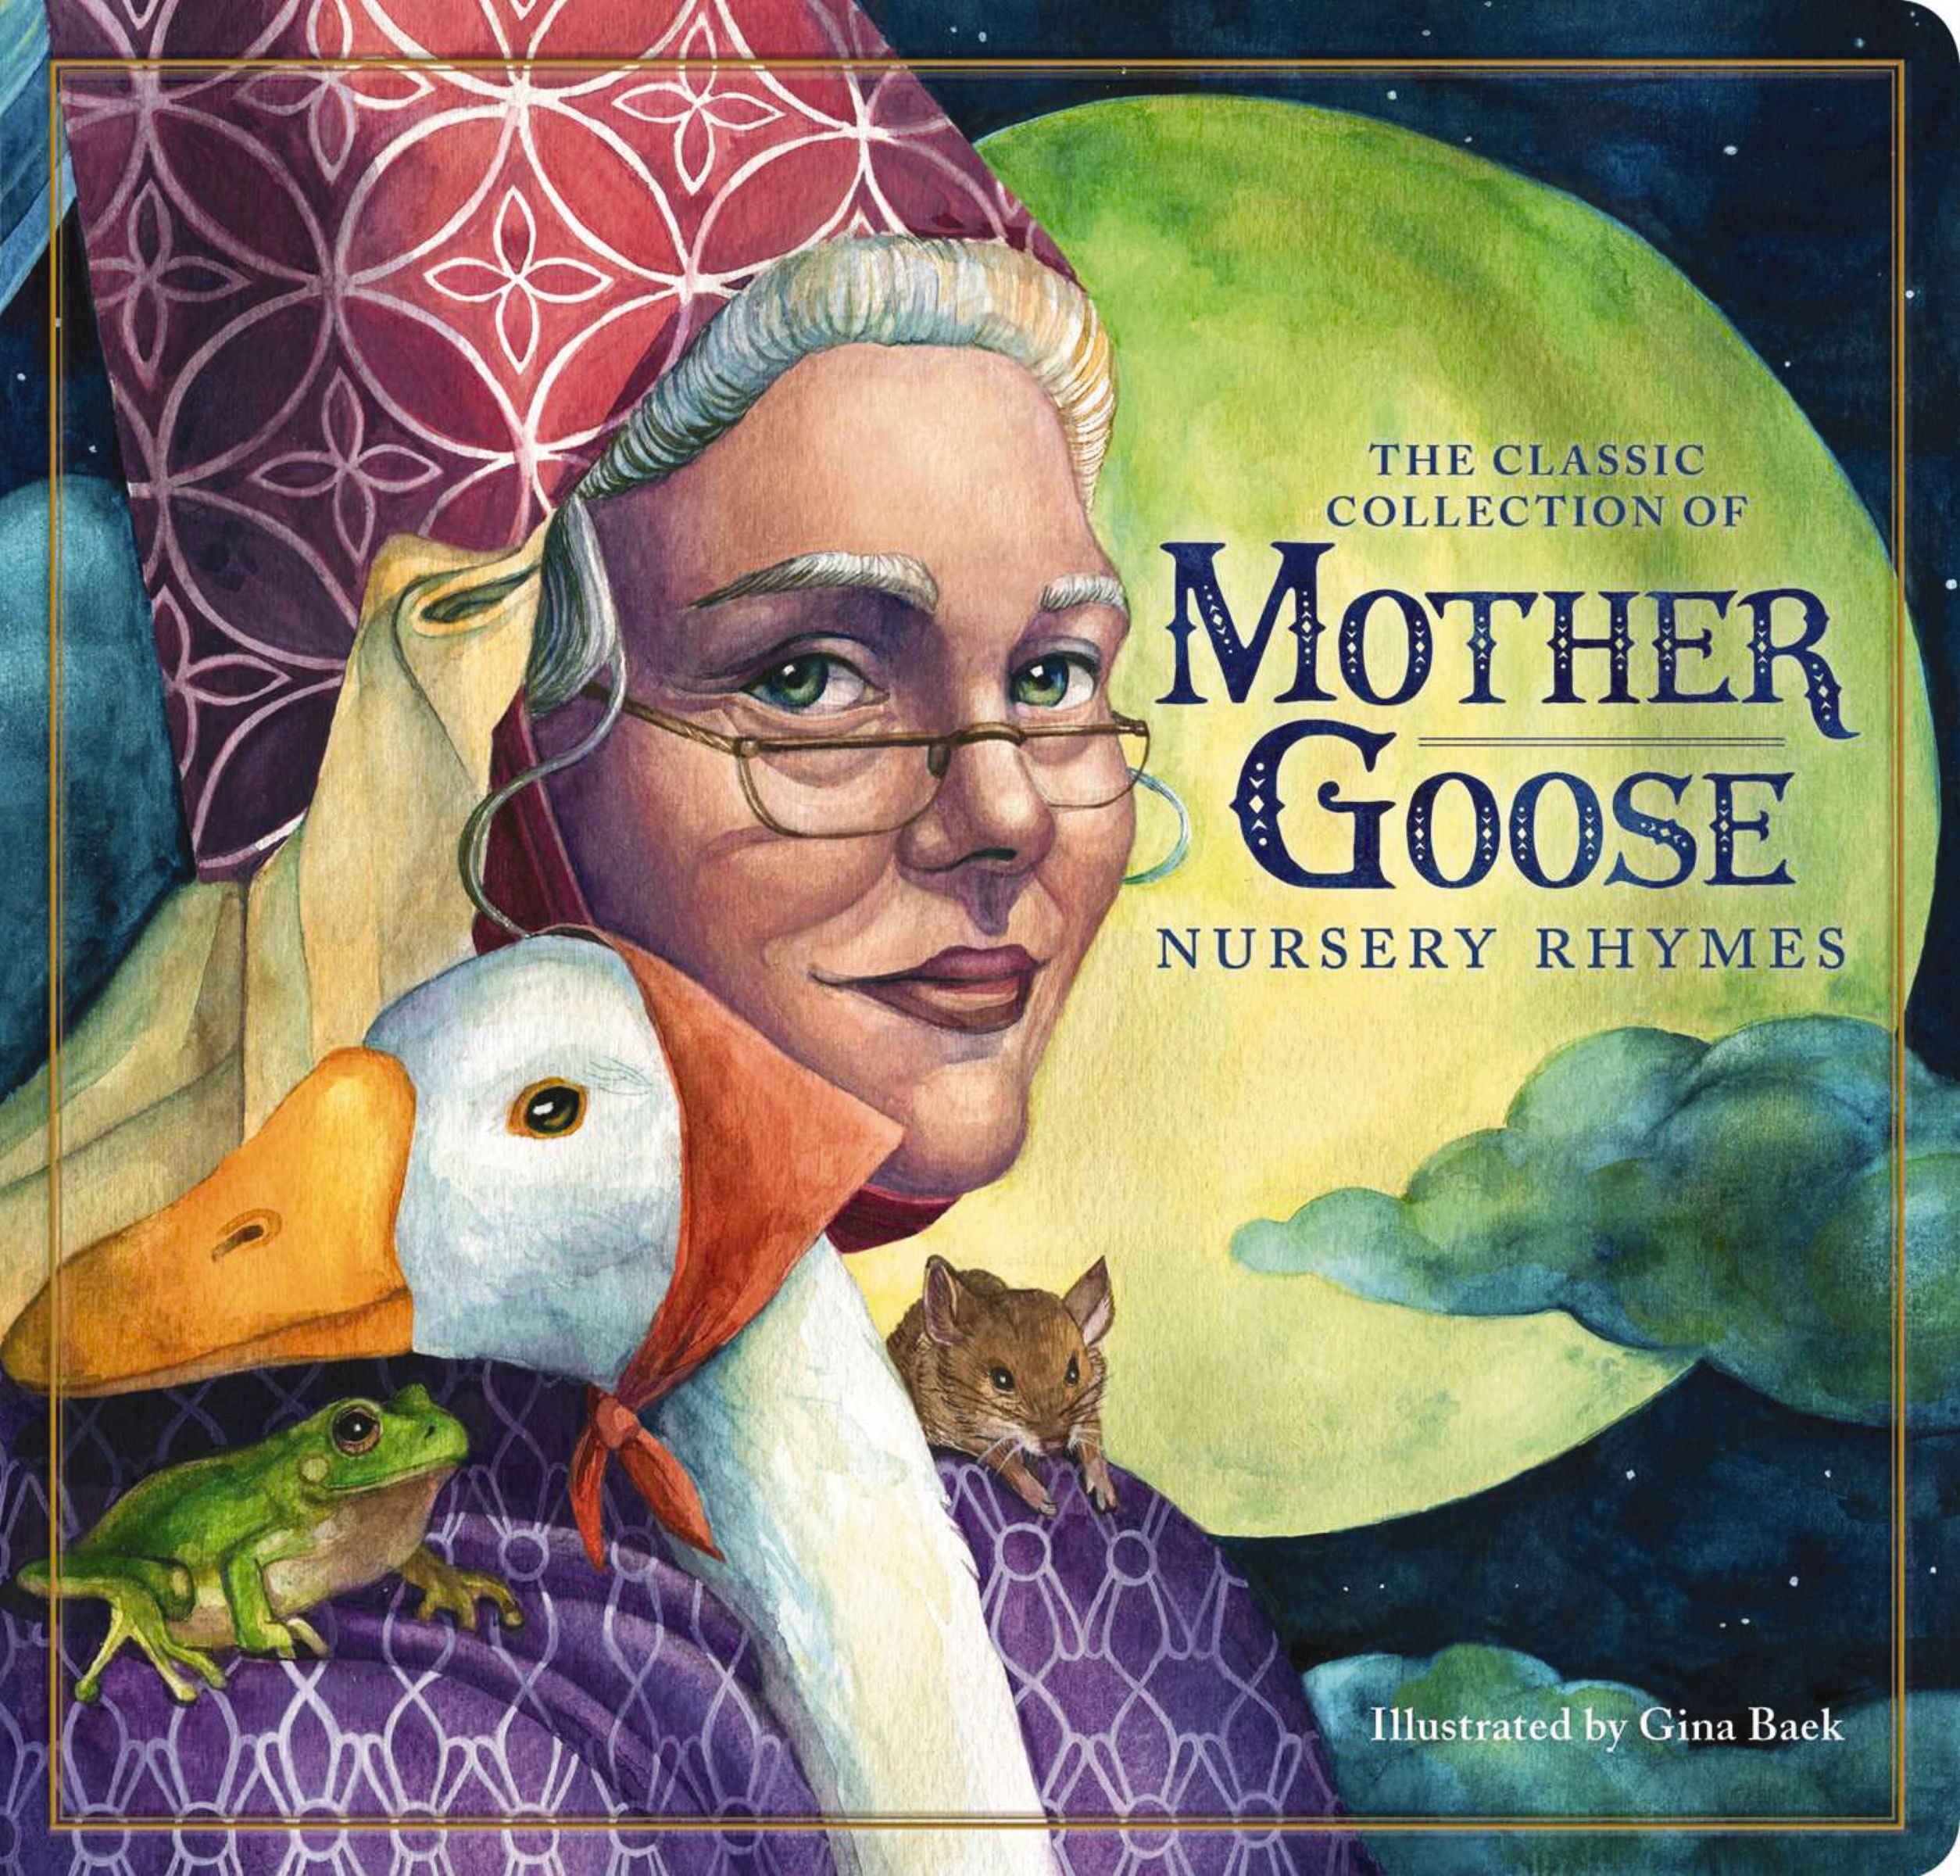 The Classic Mother Goose Nursery Rhymes (Board Book)